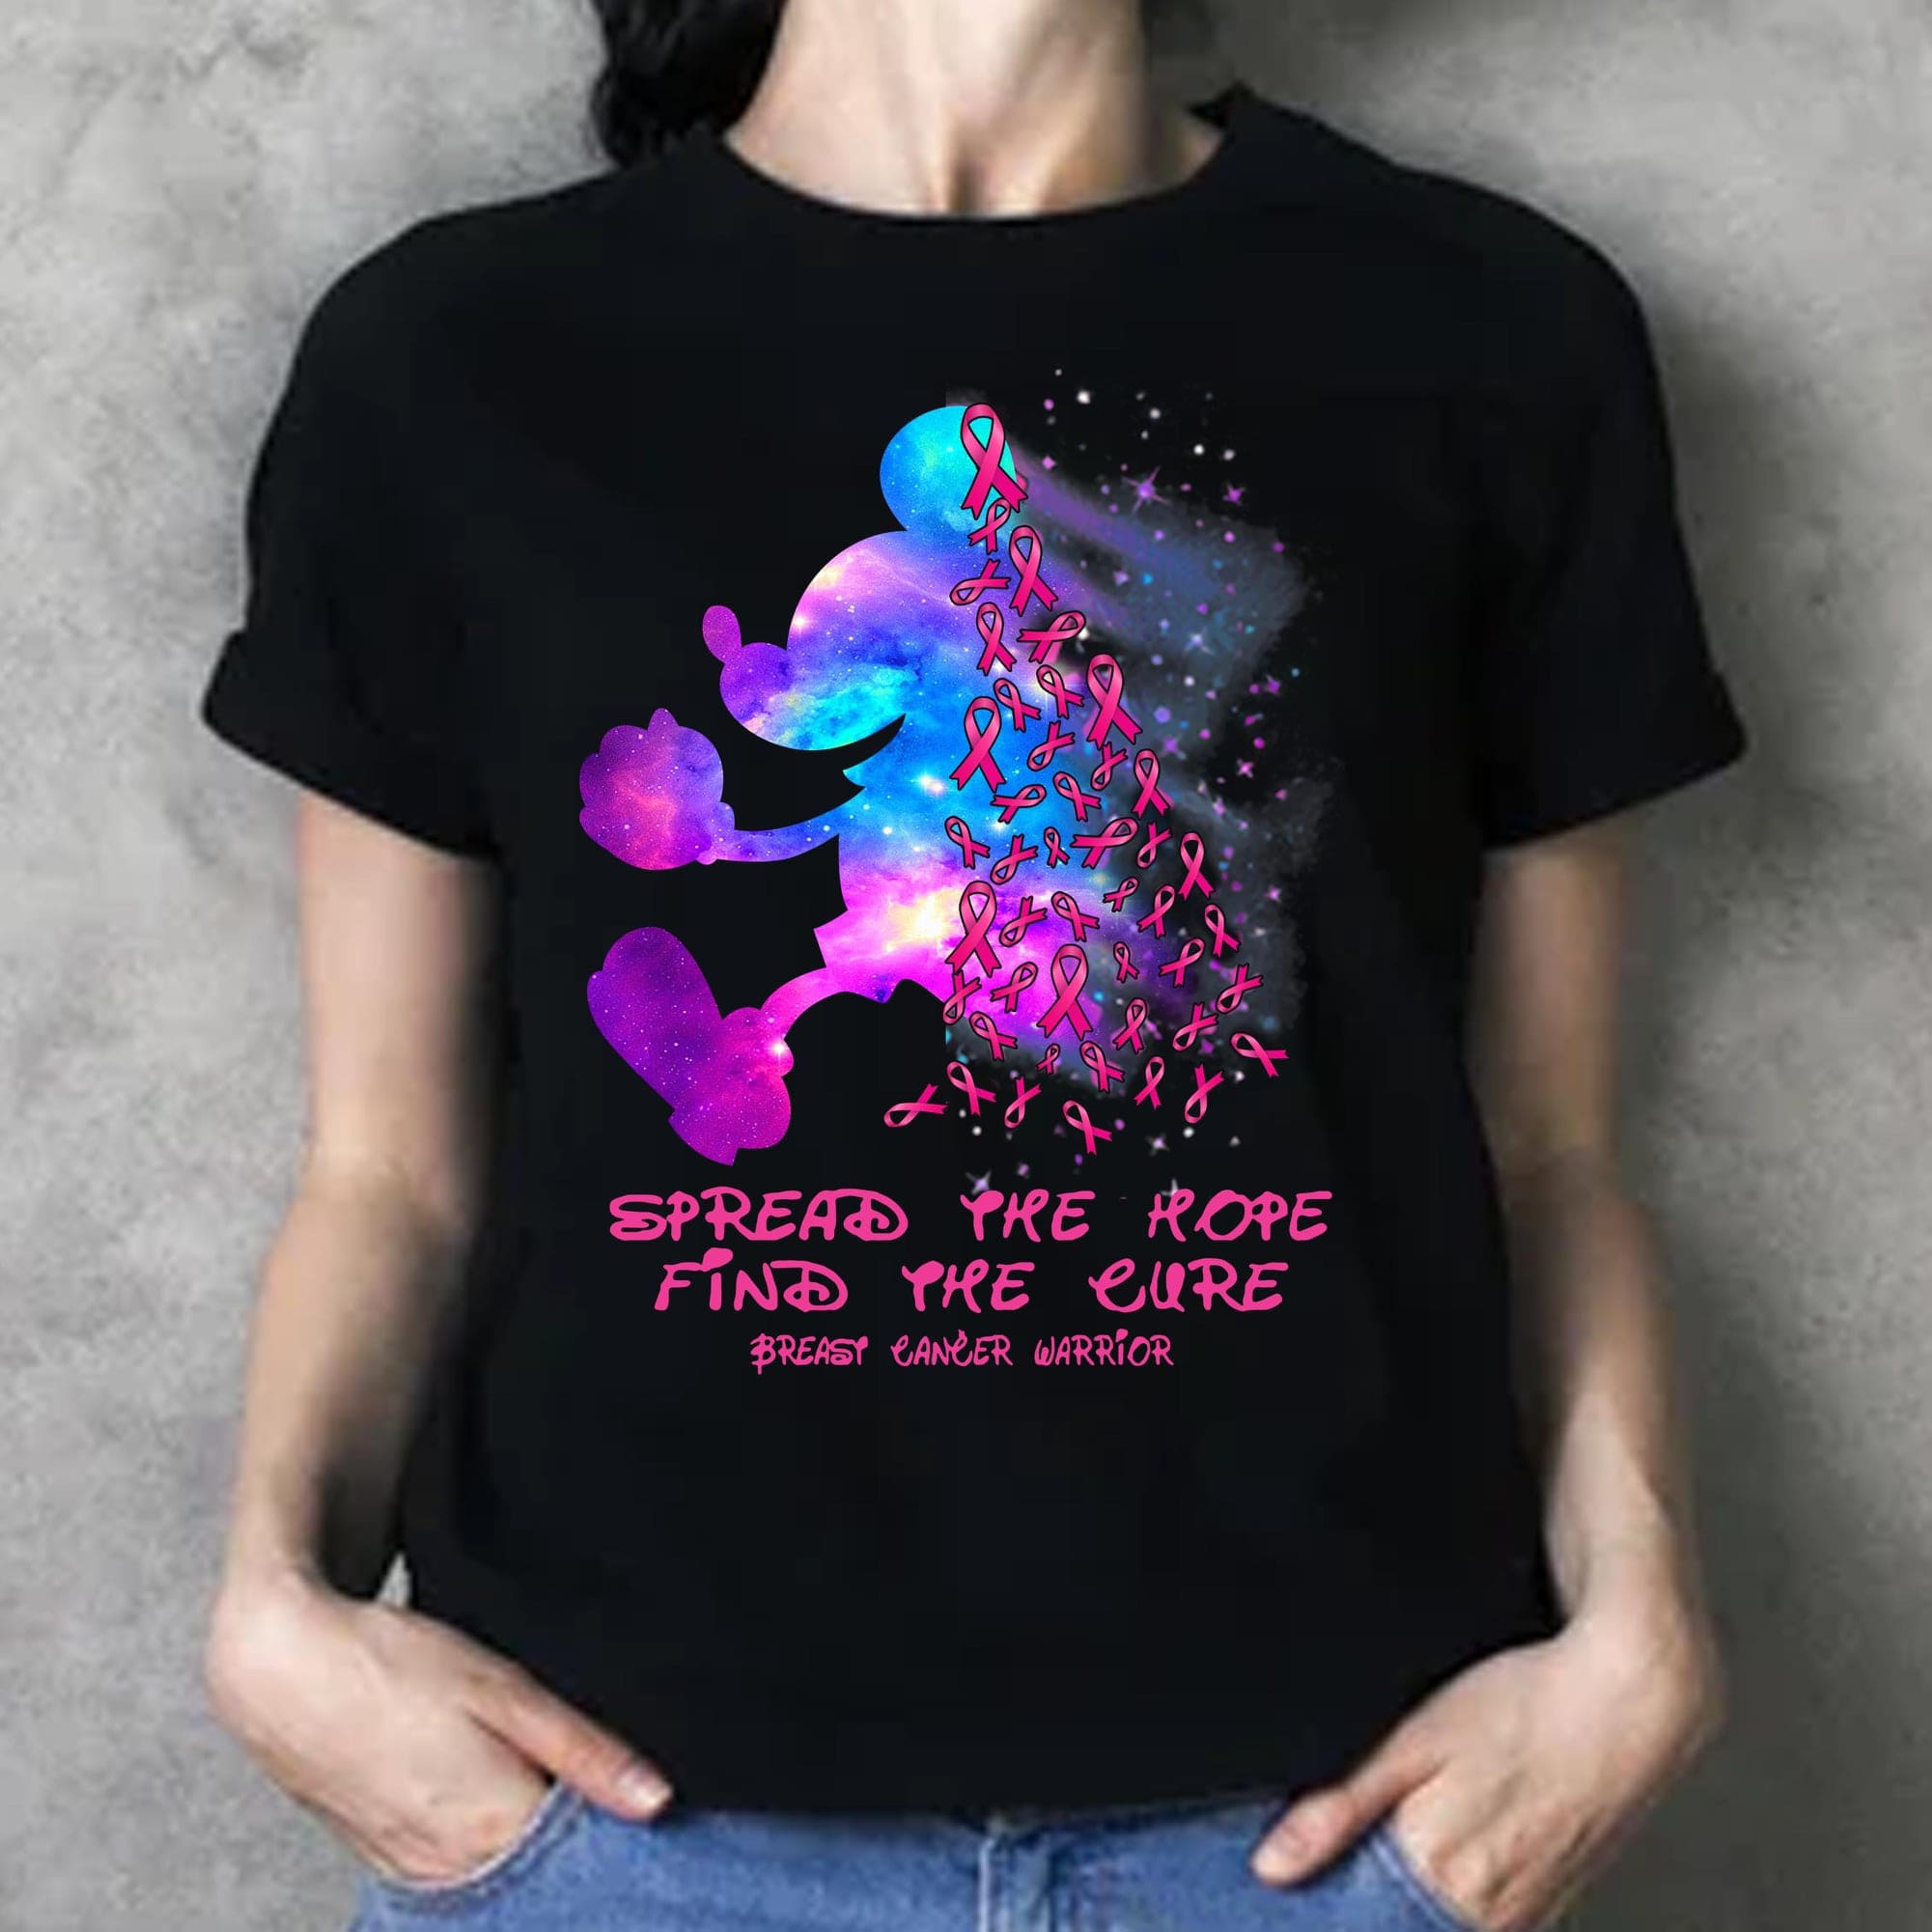 Spread the hope, find the cure - Breast cancer warrior, Breast cancer awareness T-shirt